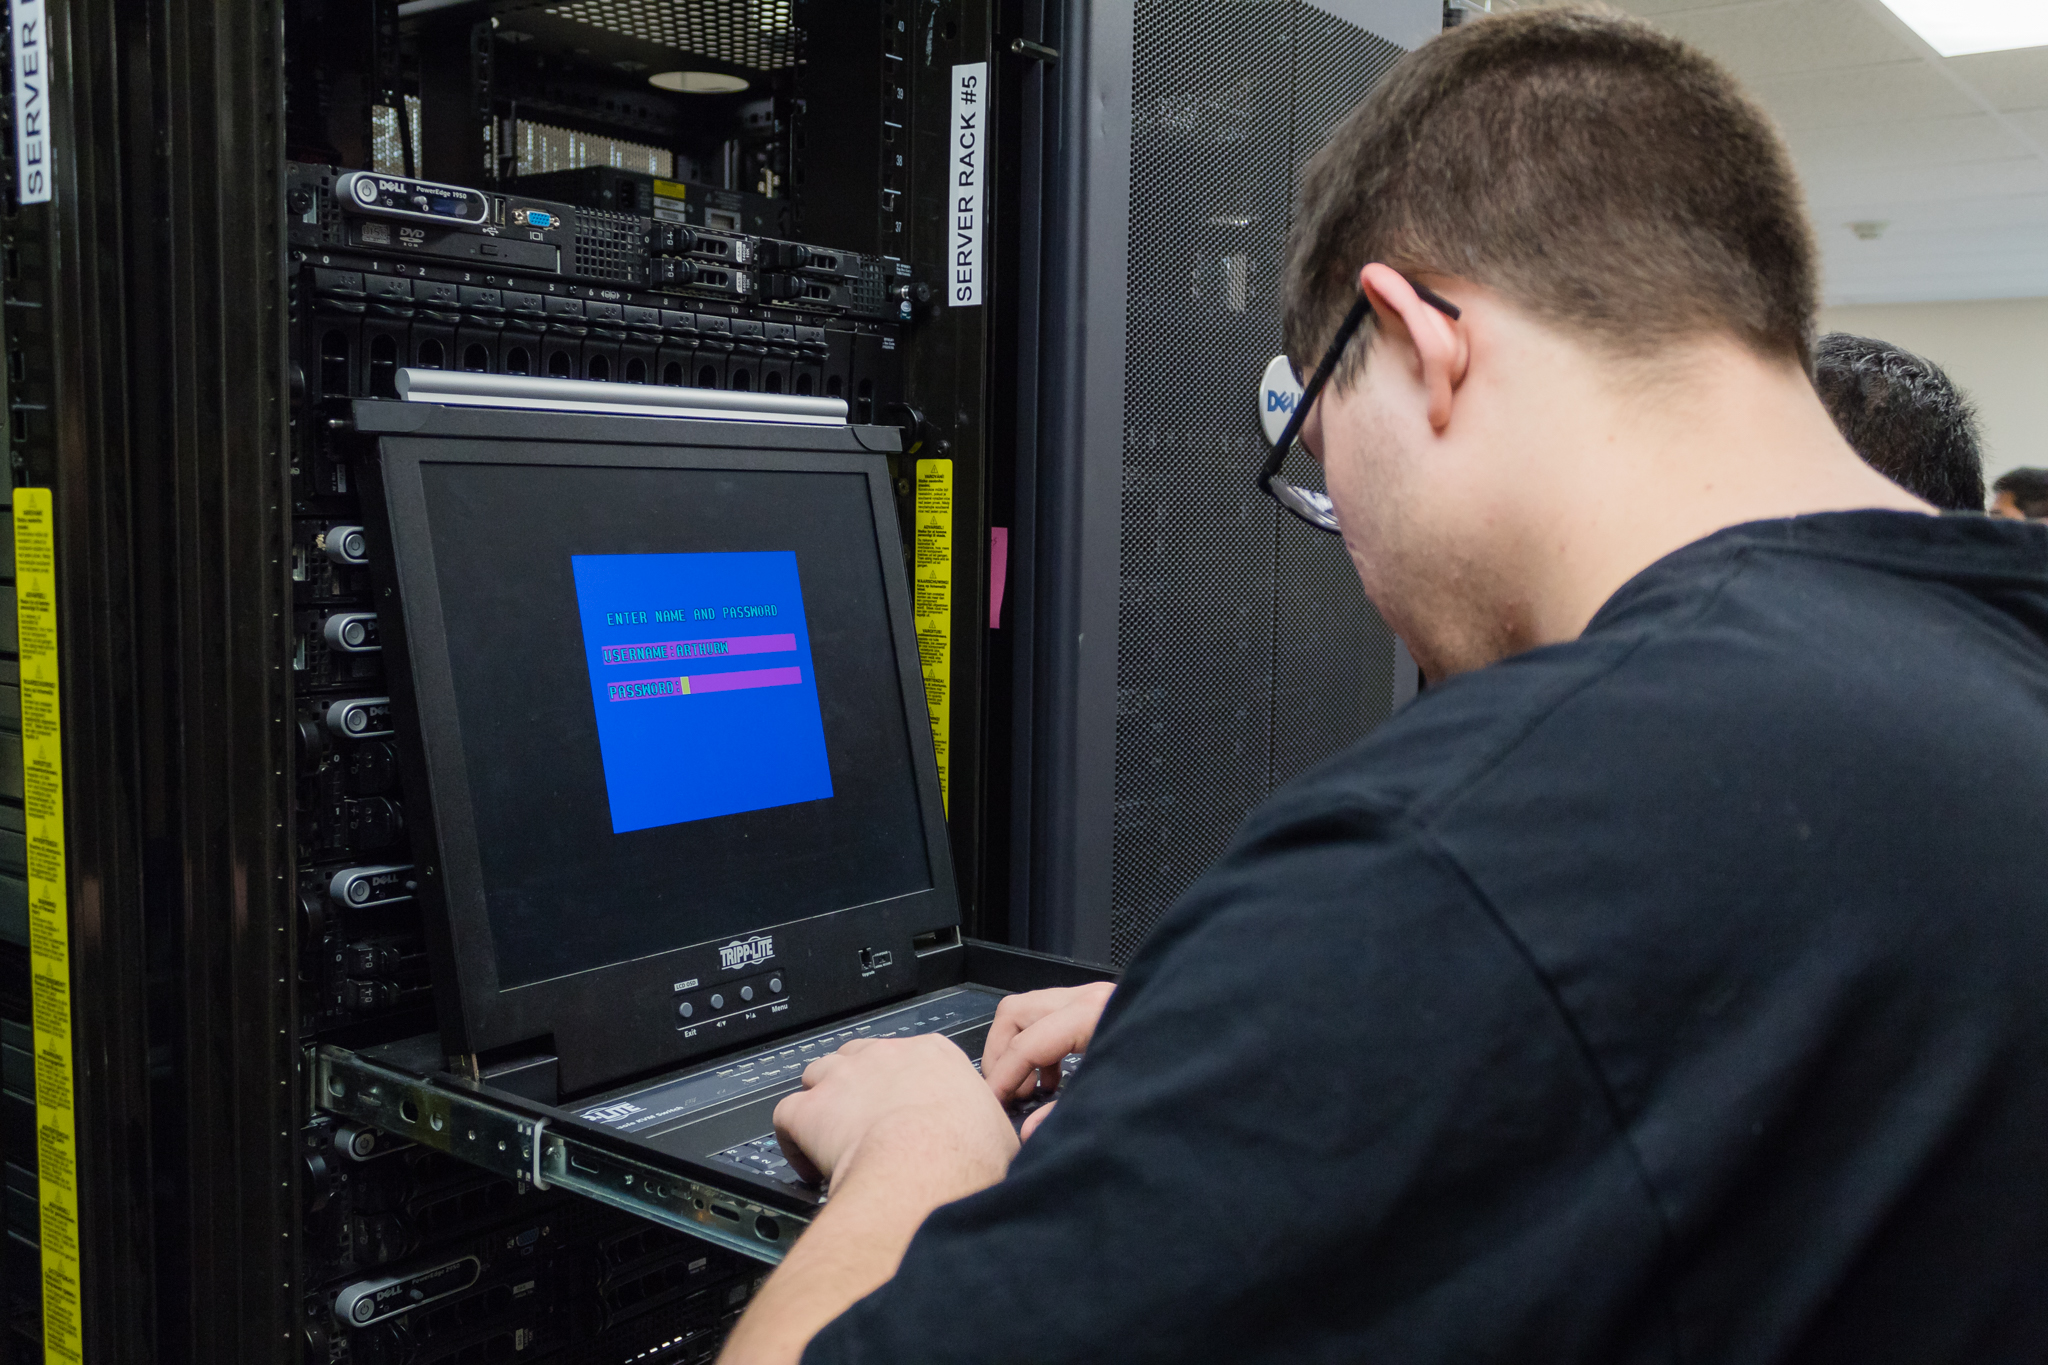 Student working on a data server